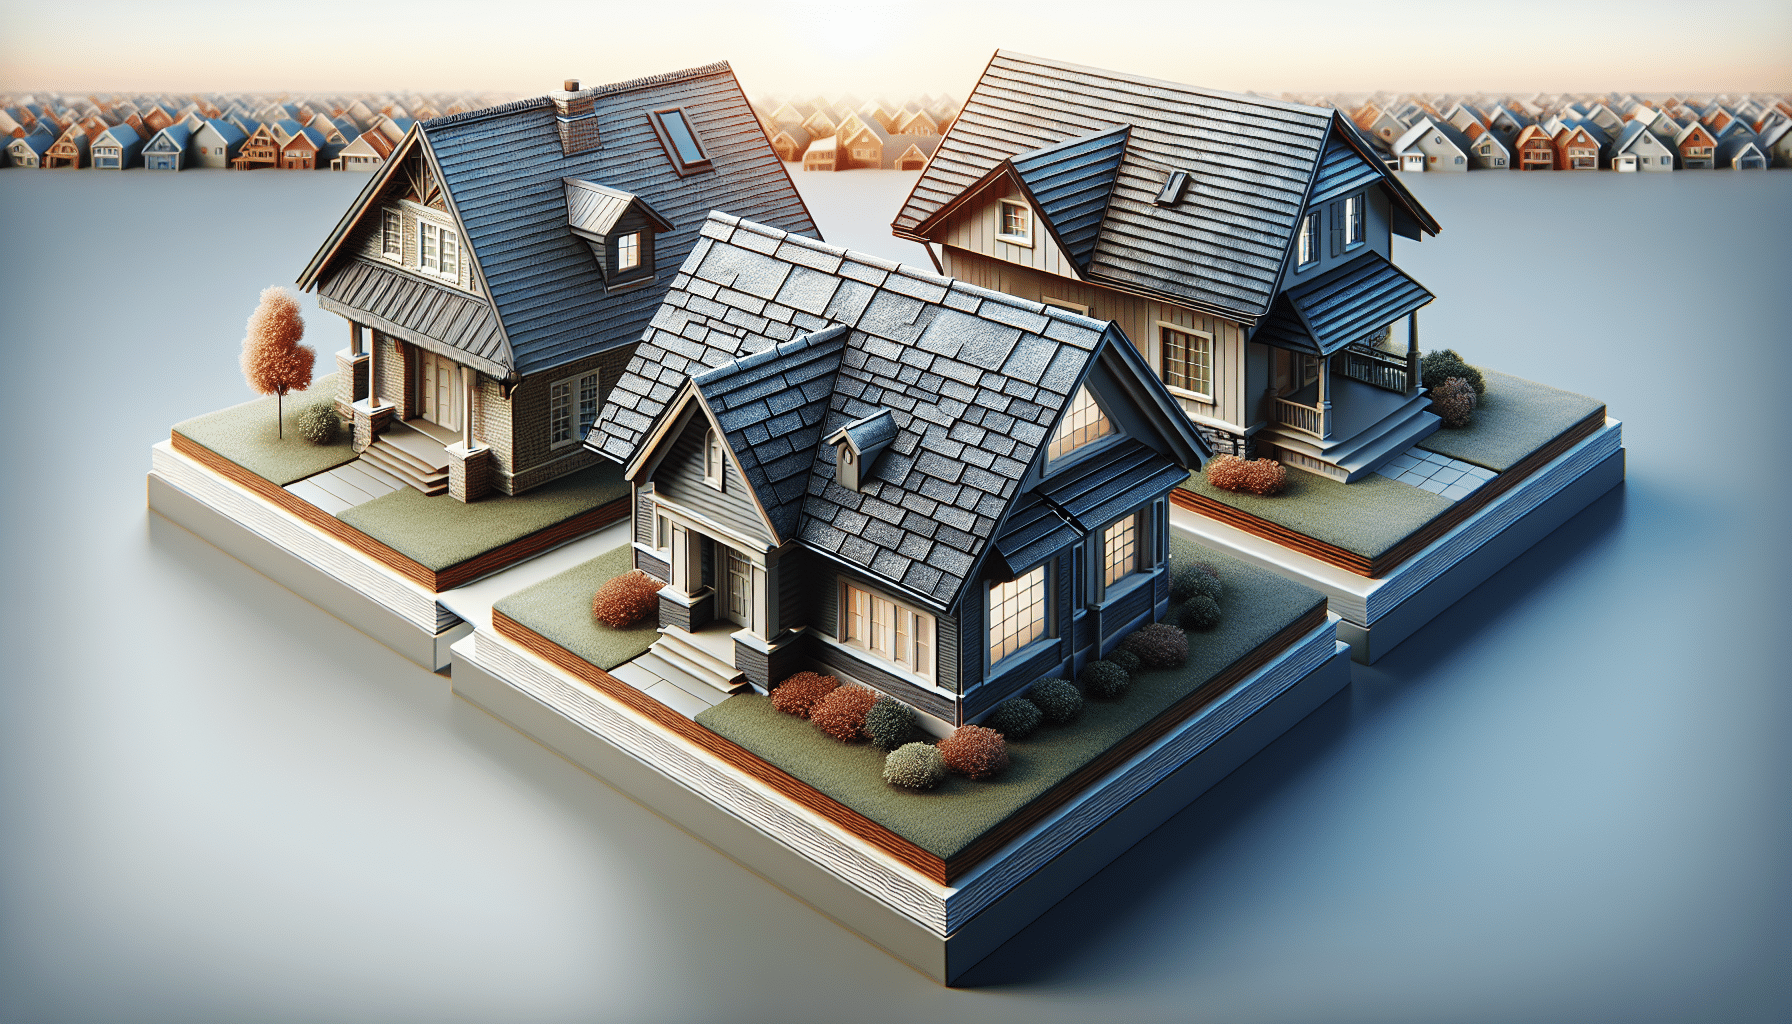 Illustration of various roofing materials